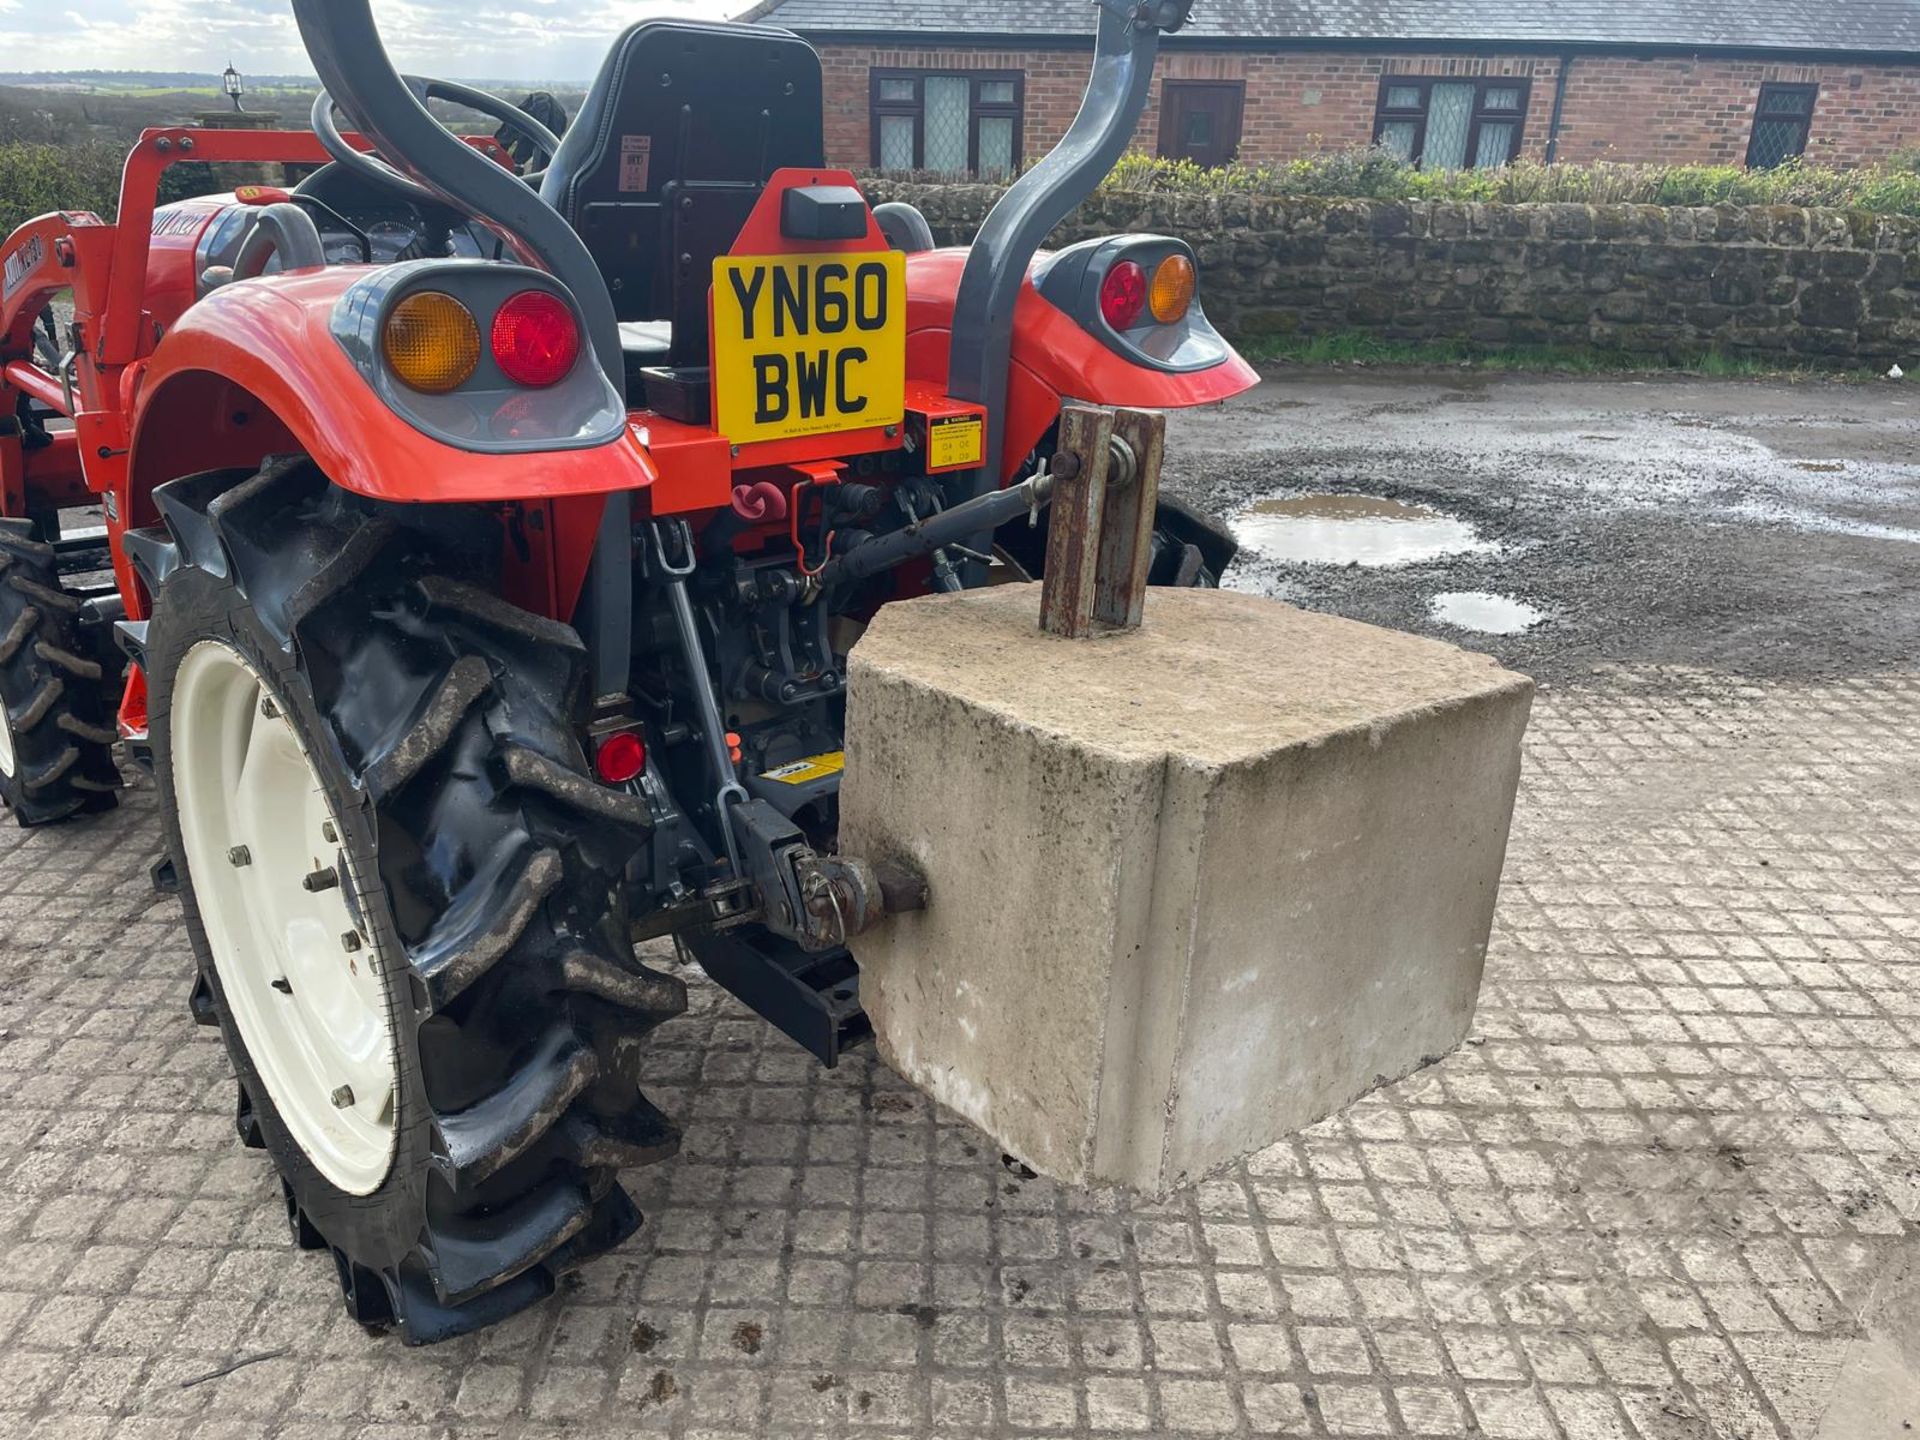 60 REG KIOTI CX27 27HP 4WD COMPACT TRACTOR WITH KIOTI KL130 FRONT LOADER AND PALLET FORKS *PLUS VAT* - Image 12 of 19